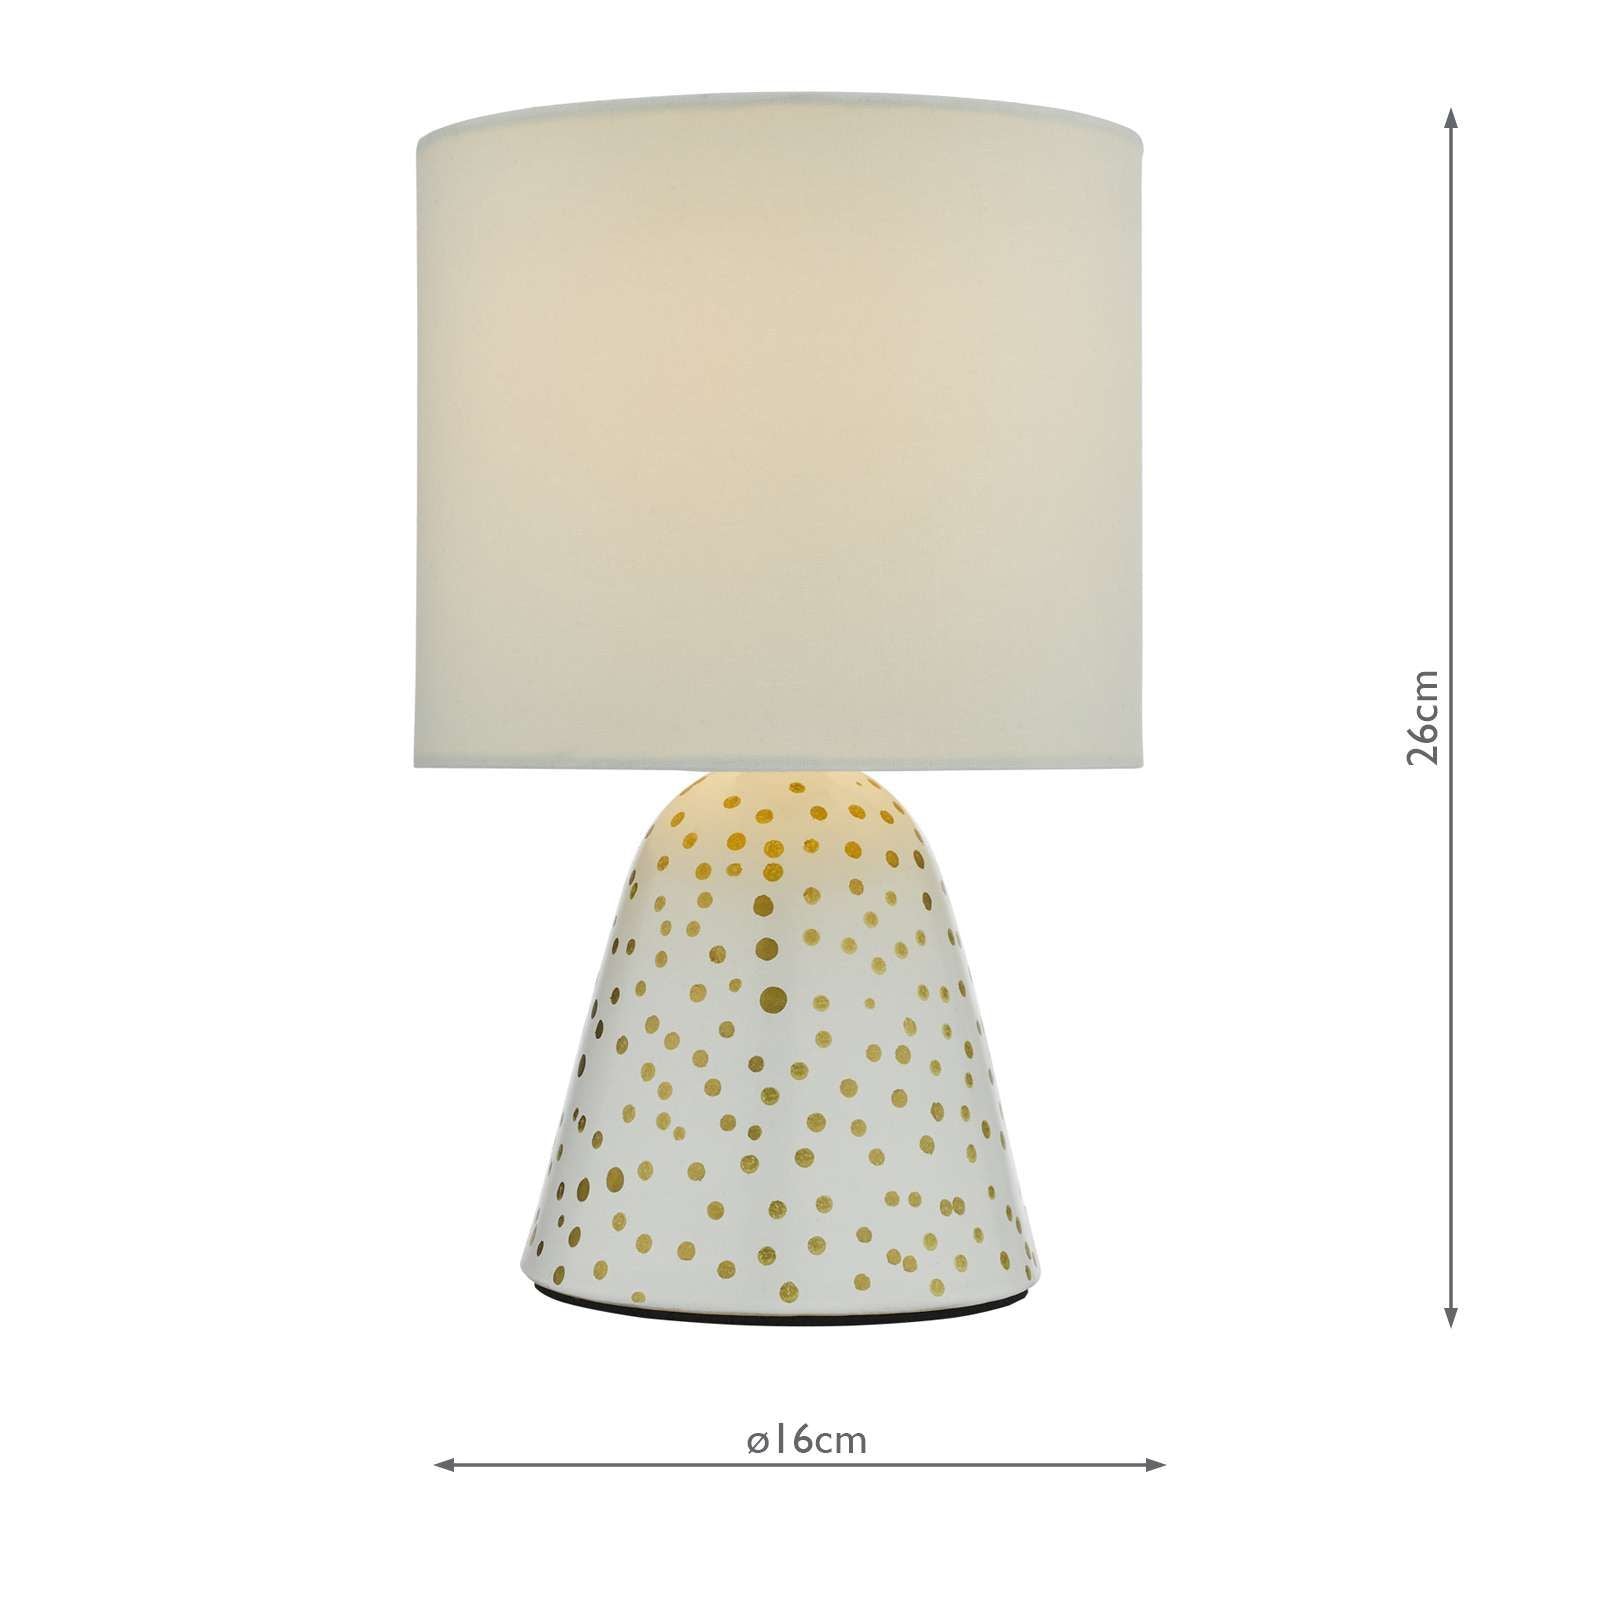 Glenda Ceramic Table Lamp White With Shade Twin Pack